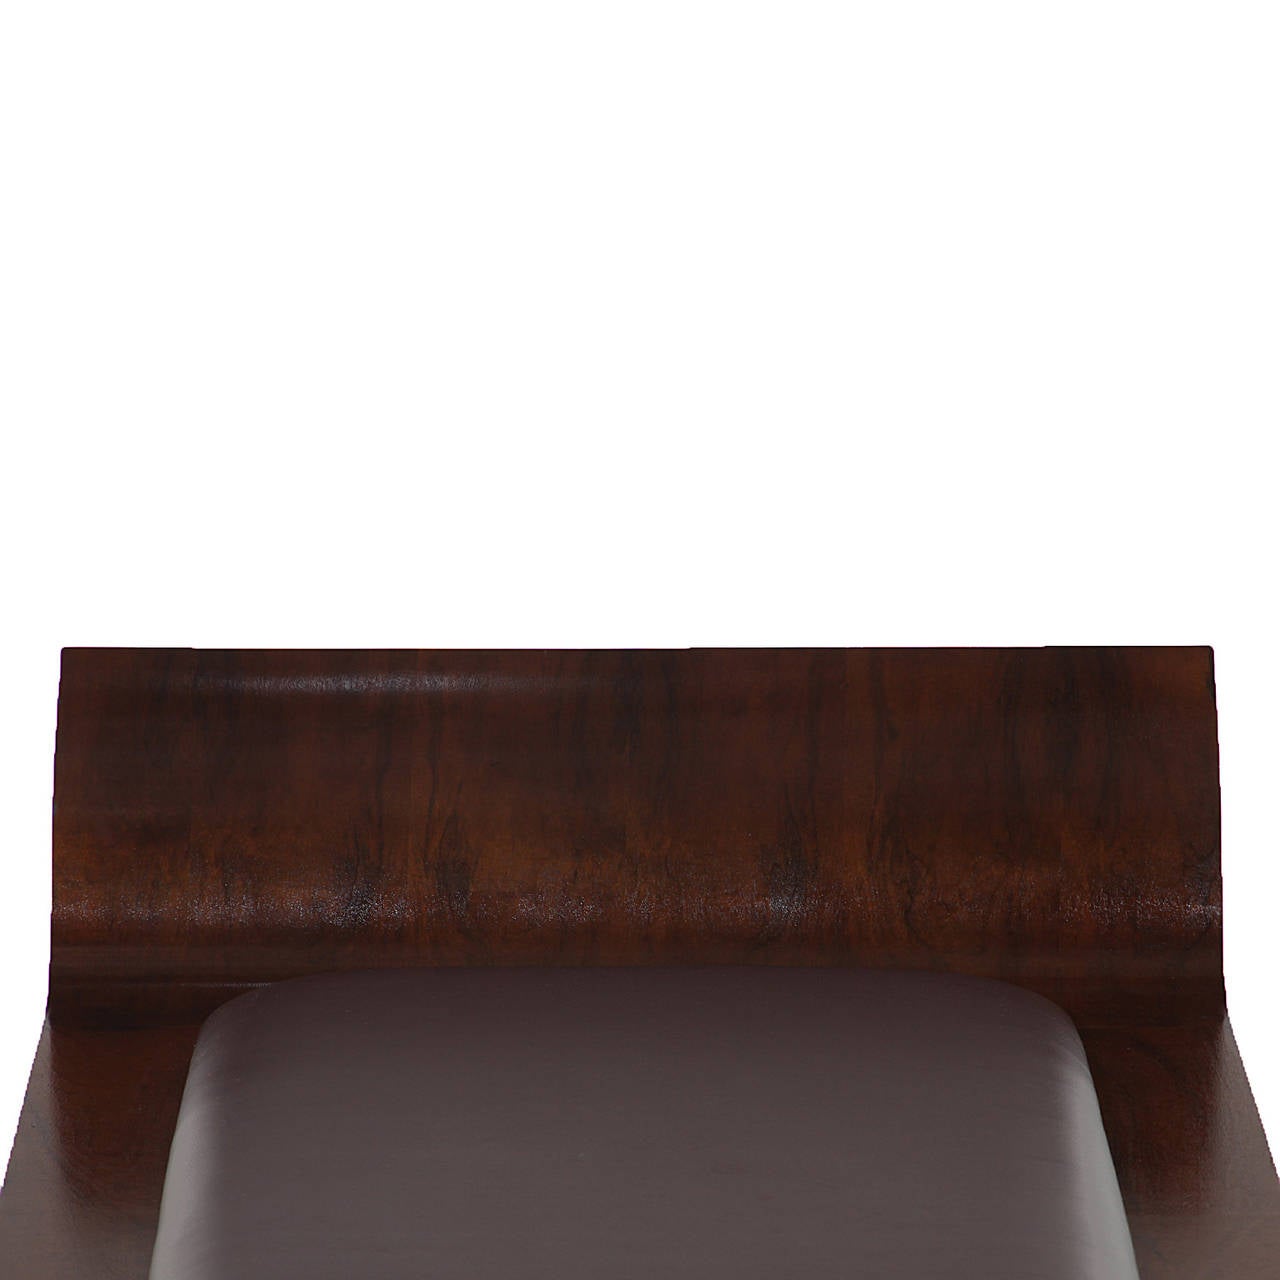 Mid-20th Century Mid-Century Rosewood and Leather Bench, Jacqueline Terpins for Tepperman For Sale